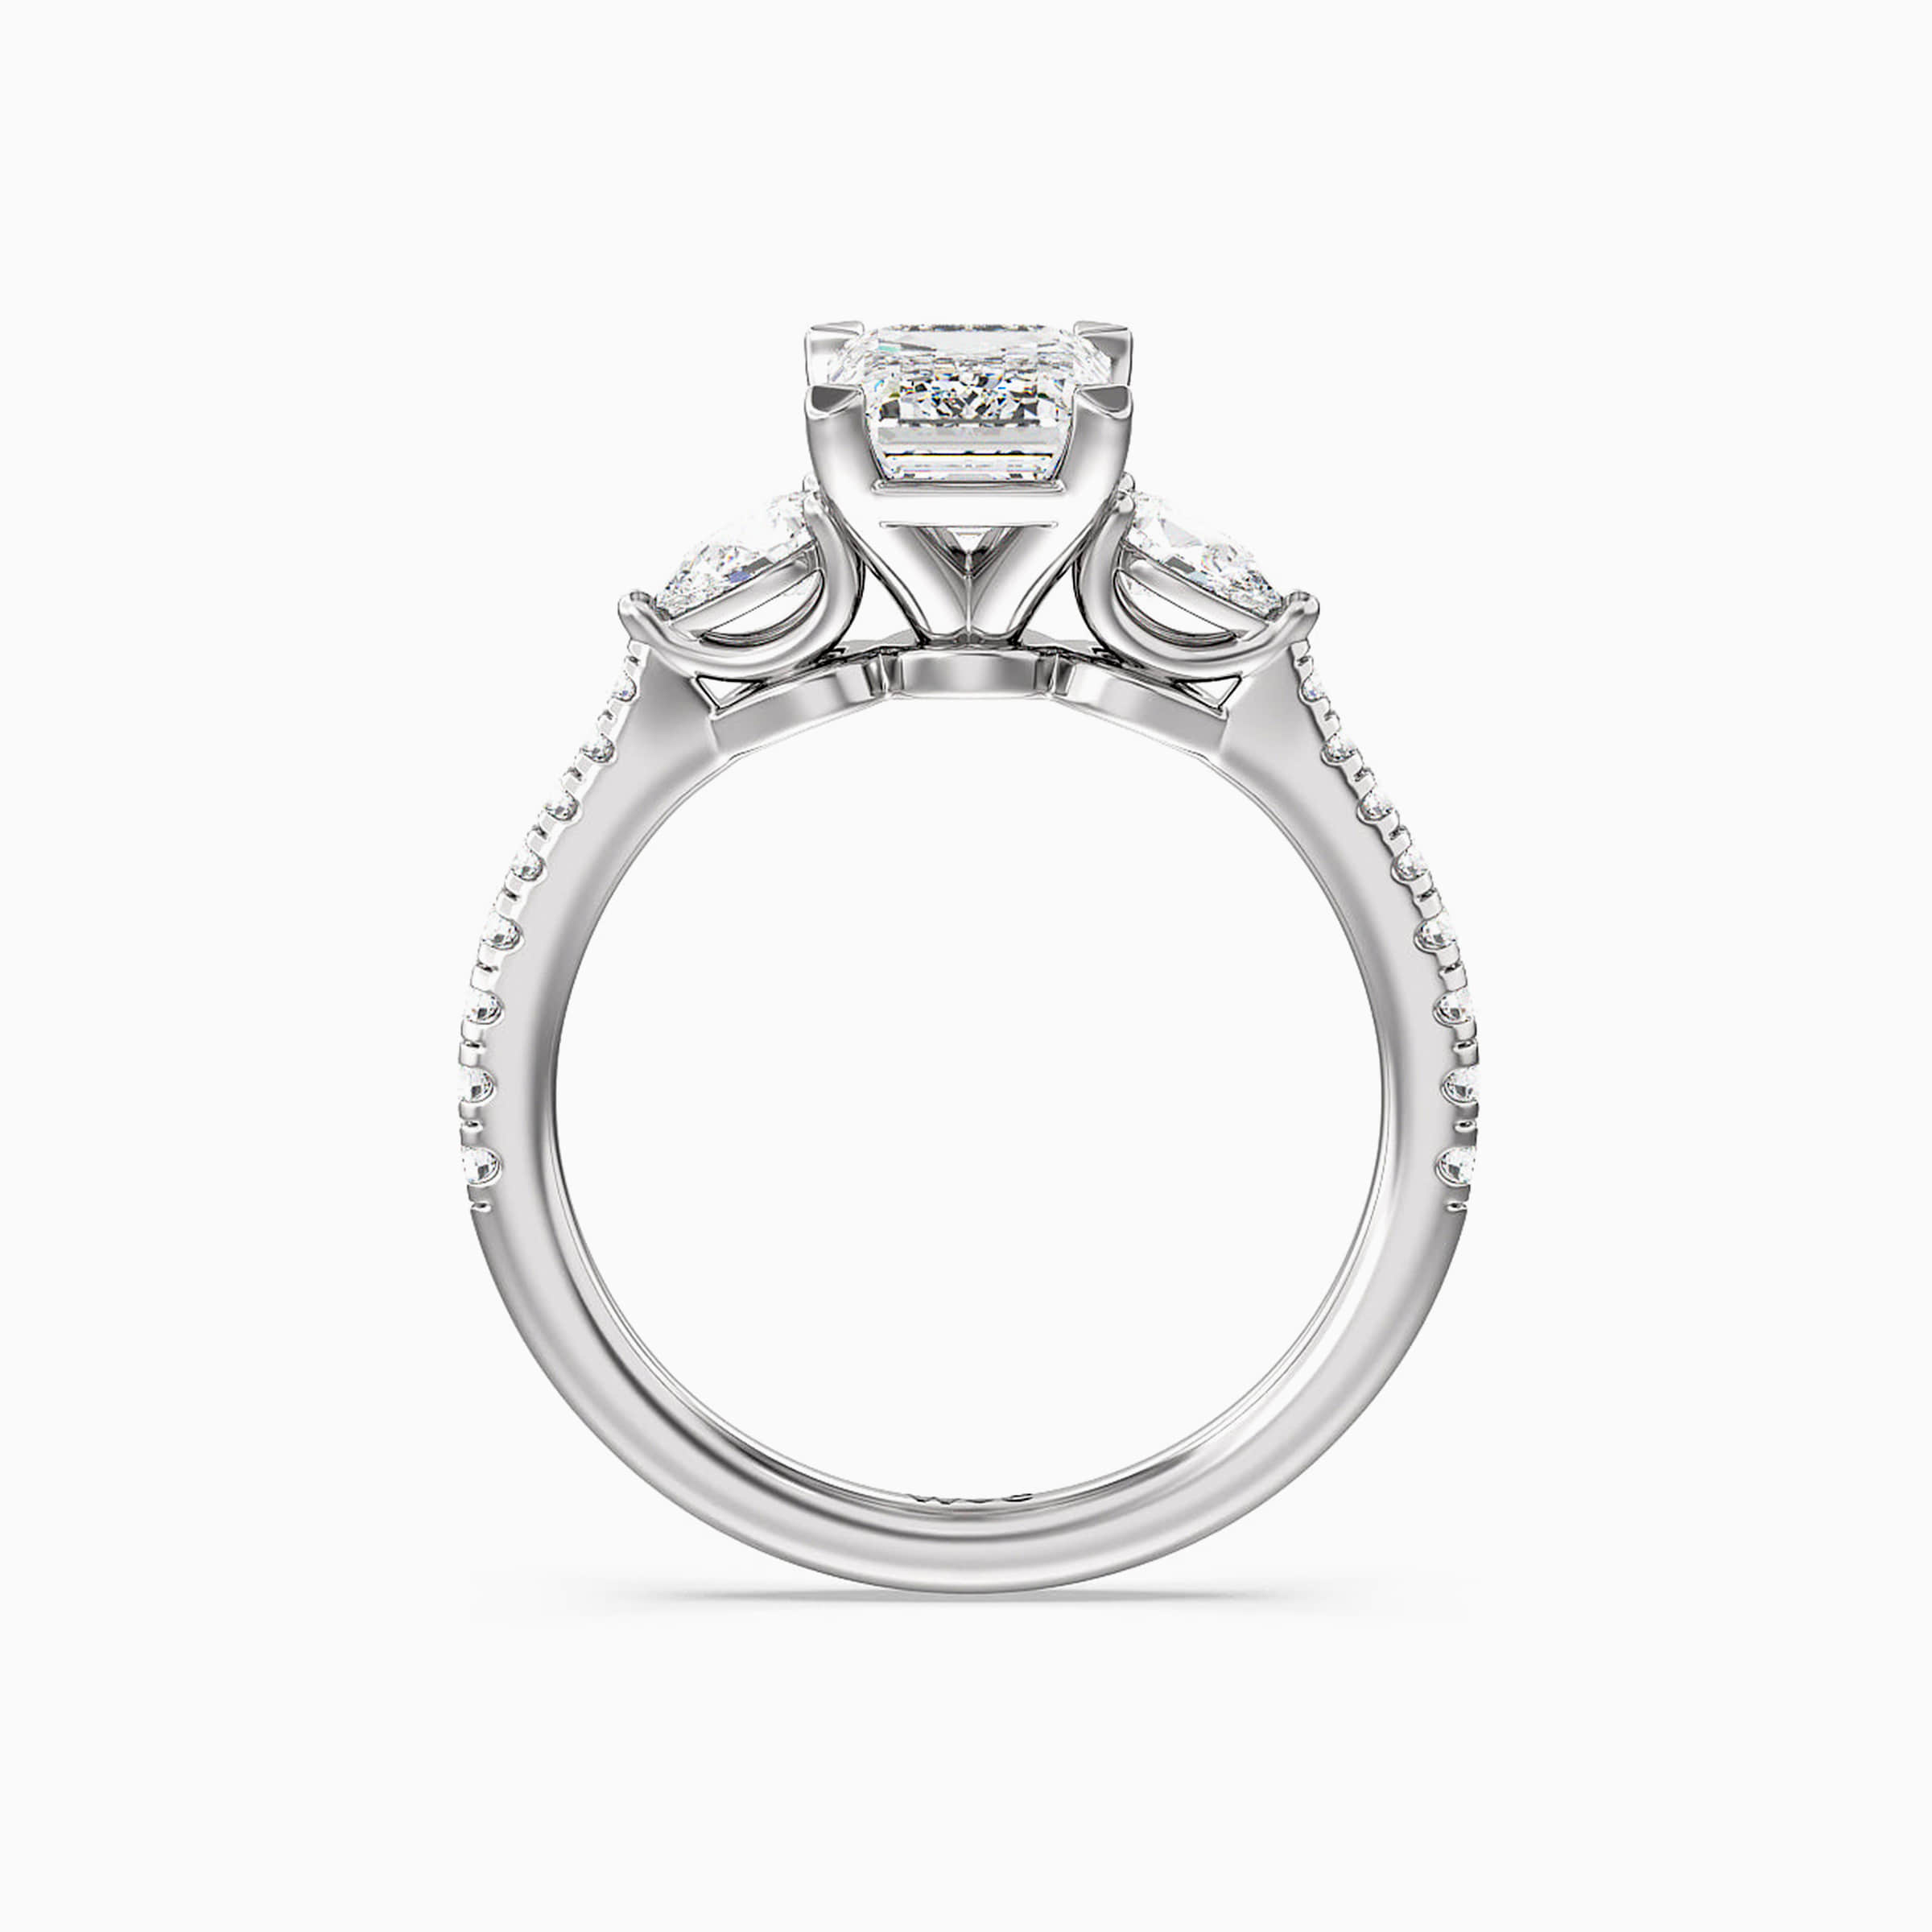 Darry Ring 3 stone emerald cut promise ring front view